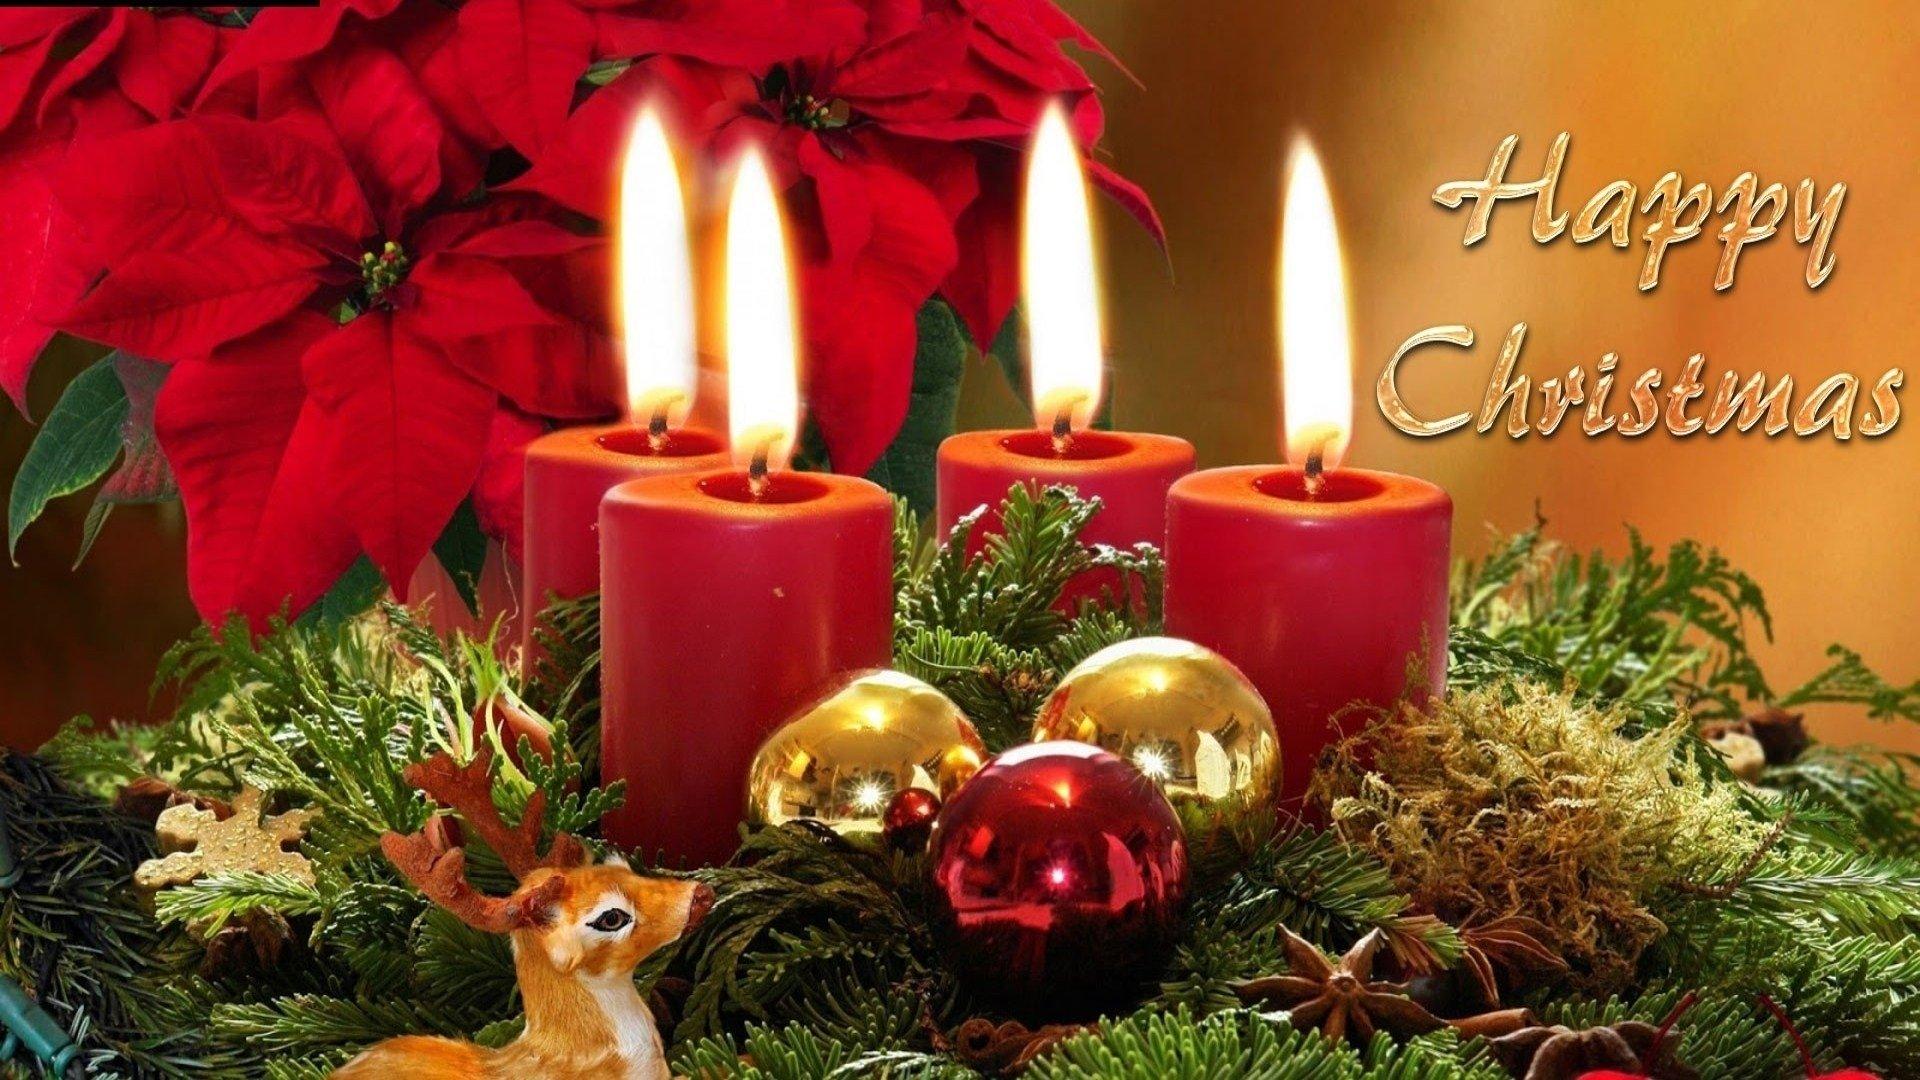 Merry Christmas HD Wallpaper. Background Imagex1080